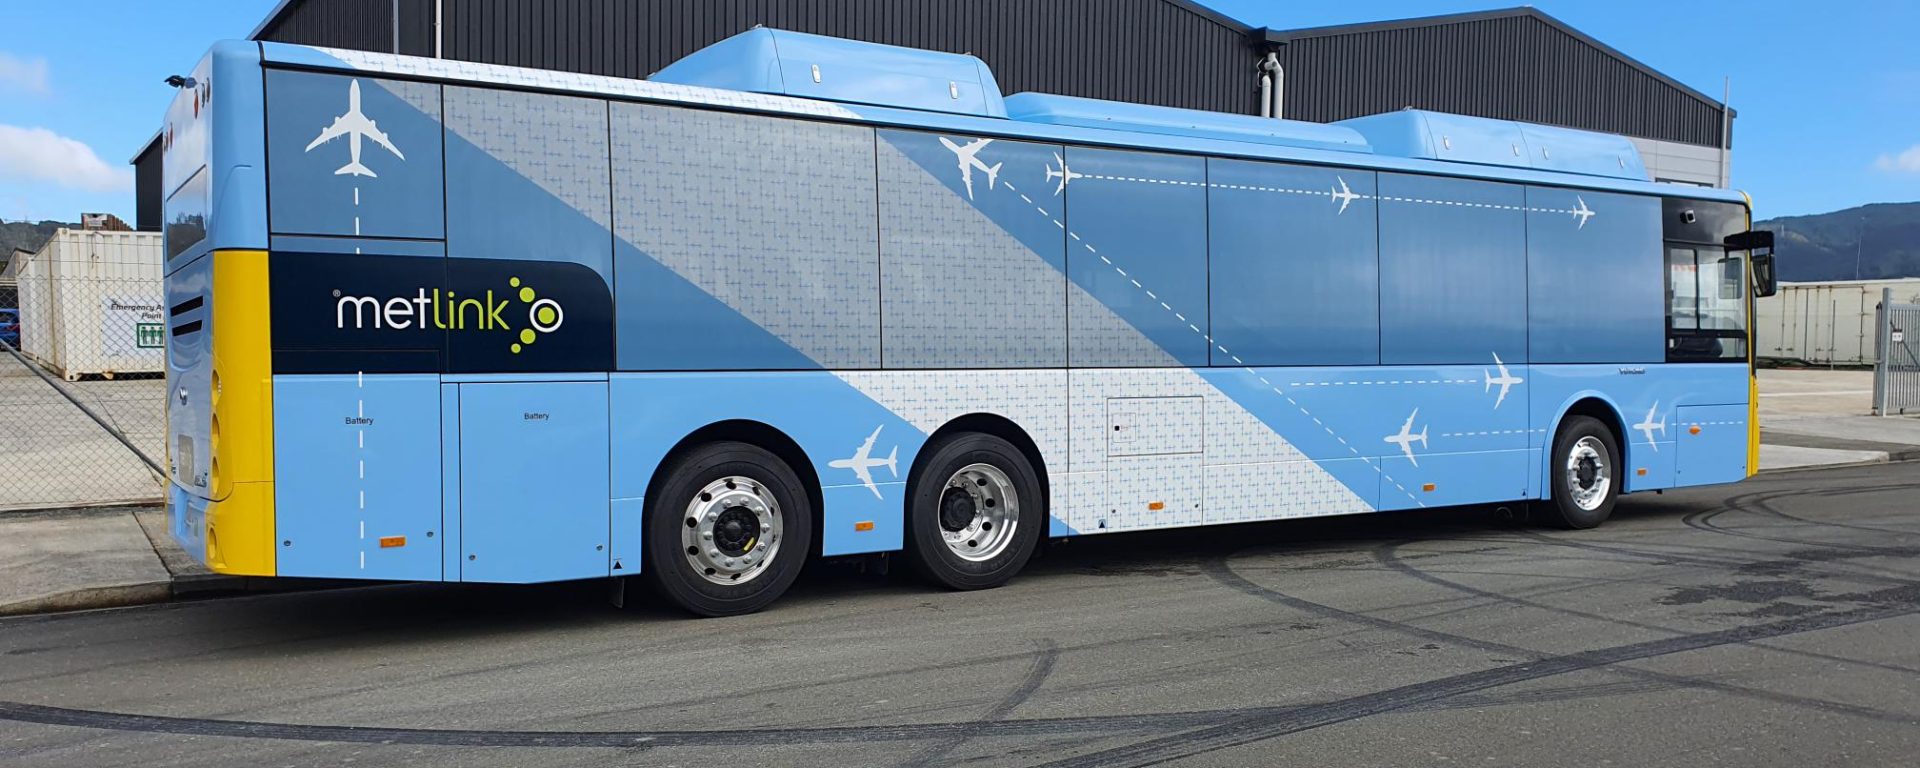 Image of Wellington Airport Express bus